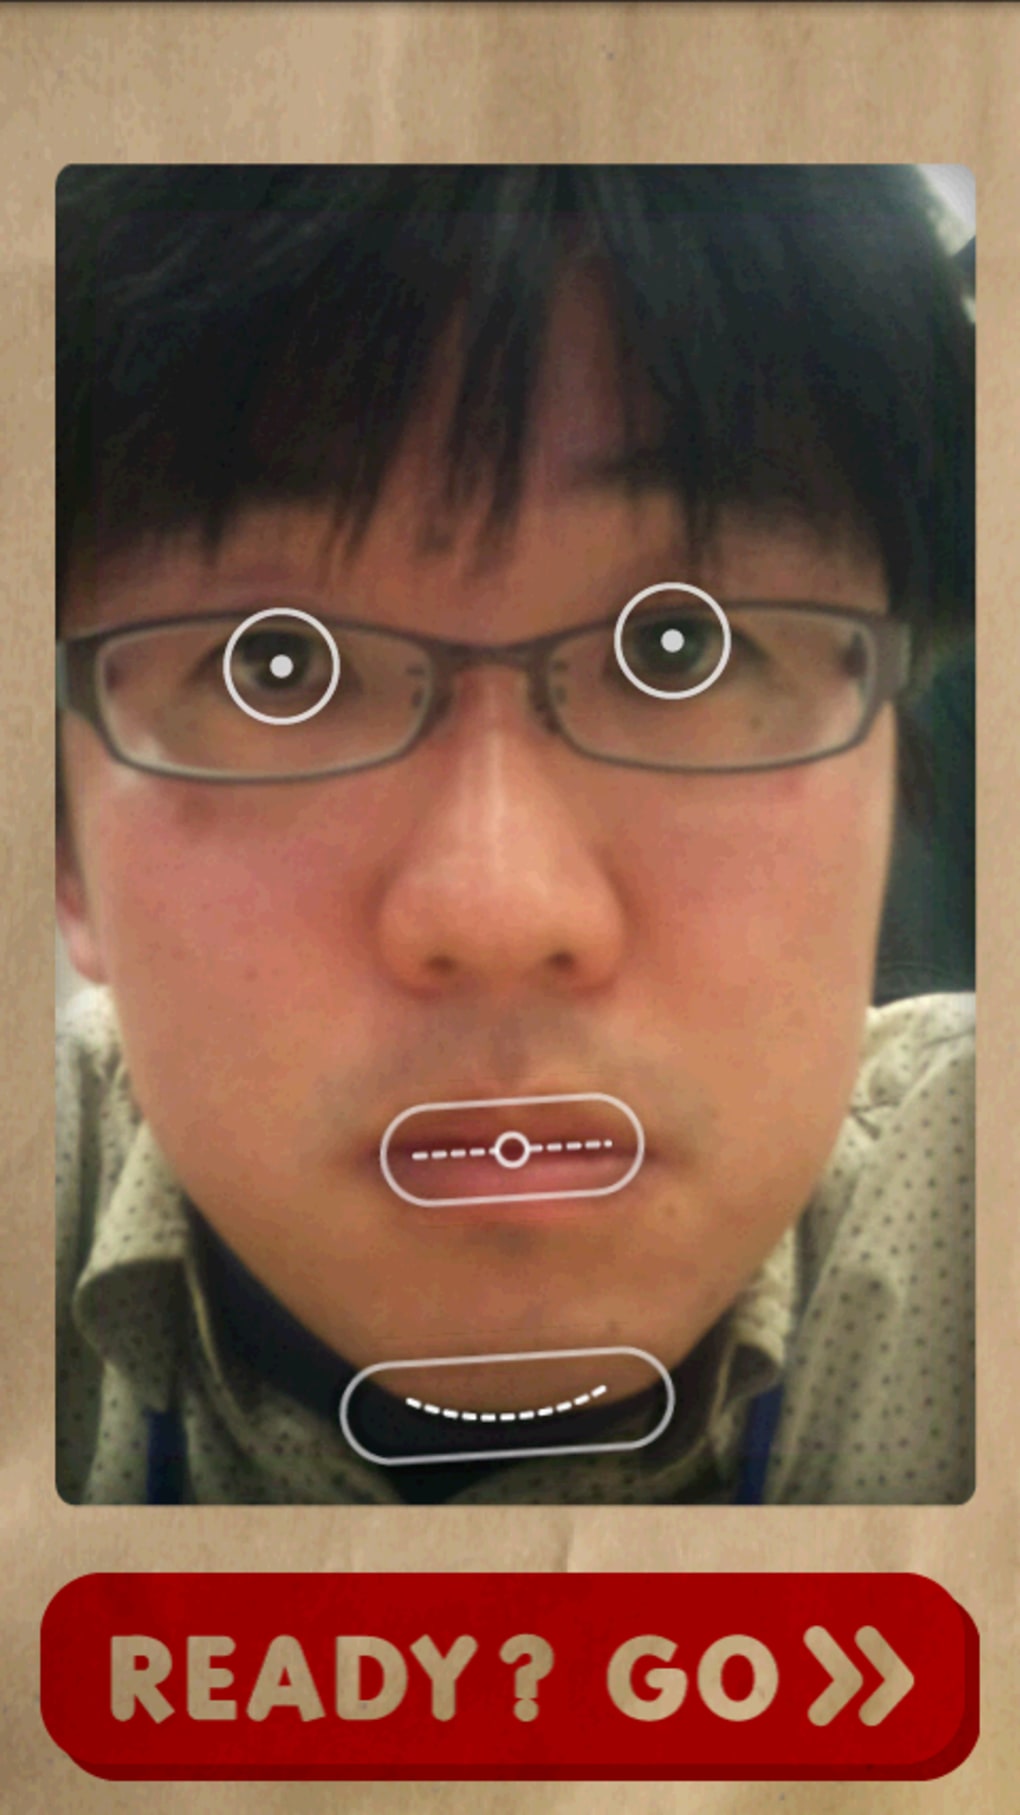 Fatbooth For Android 無料 ダウンロード